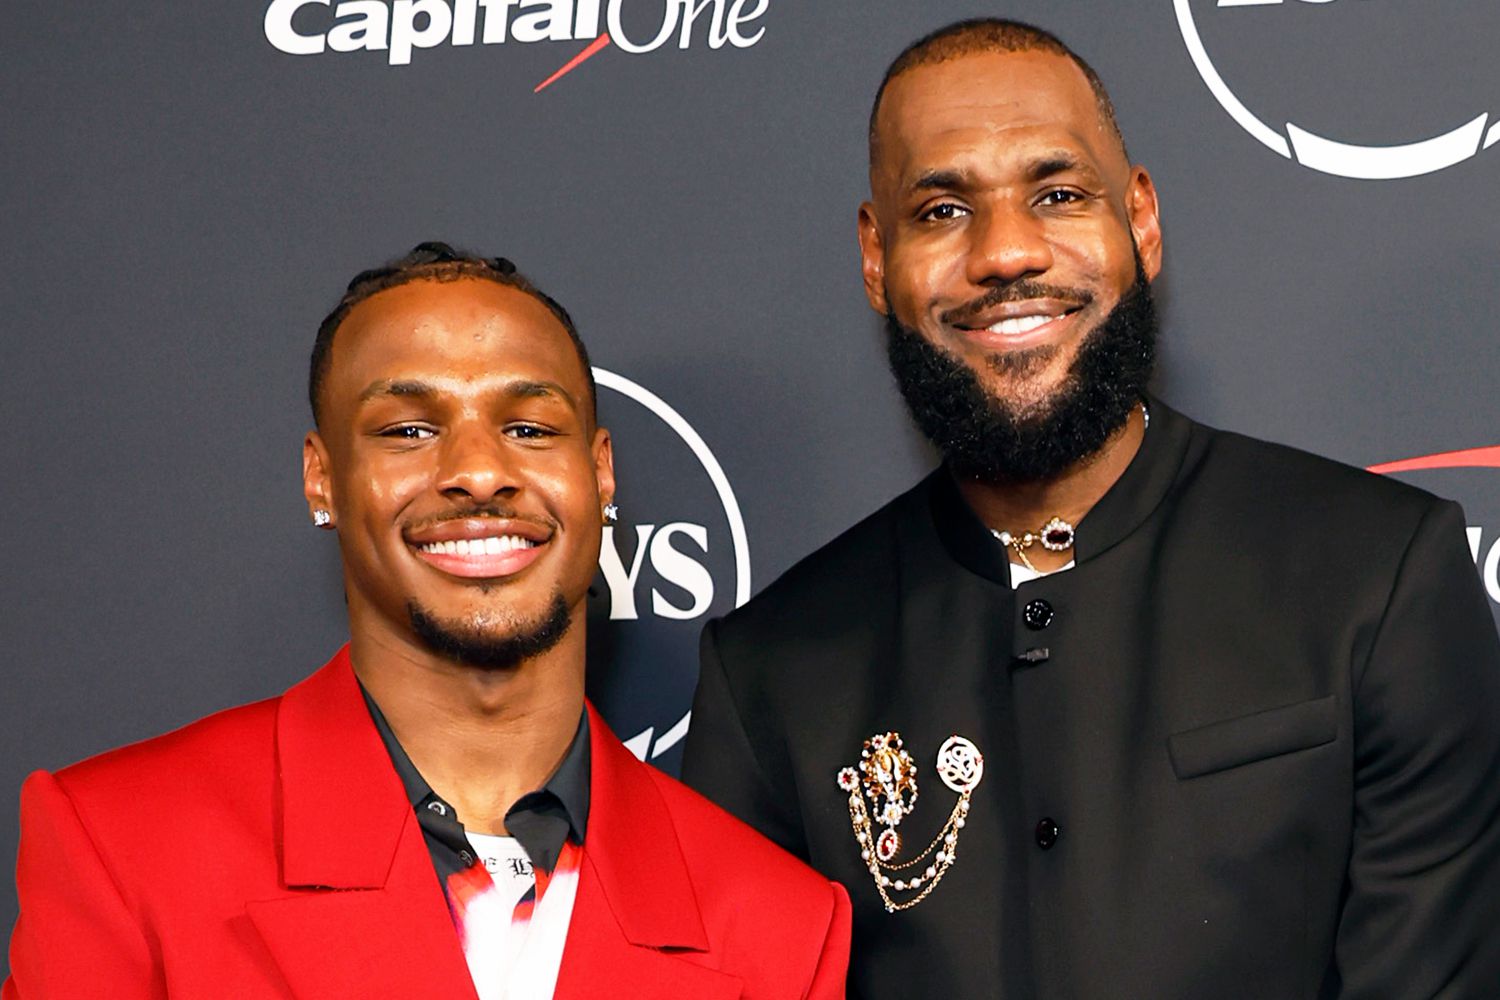 Lakers Rumored To Draft Bronny James To Help LeBron James Fulfill His Dream Of Playing With His Son